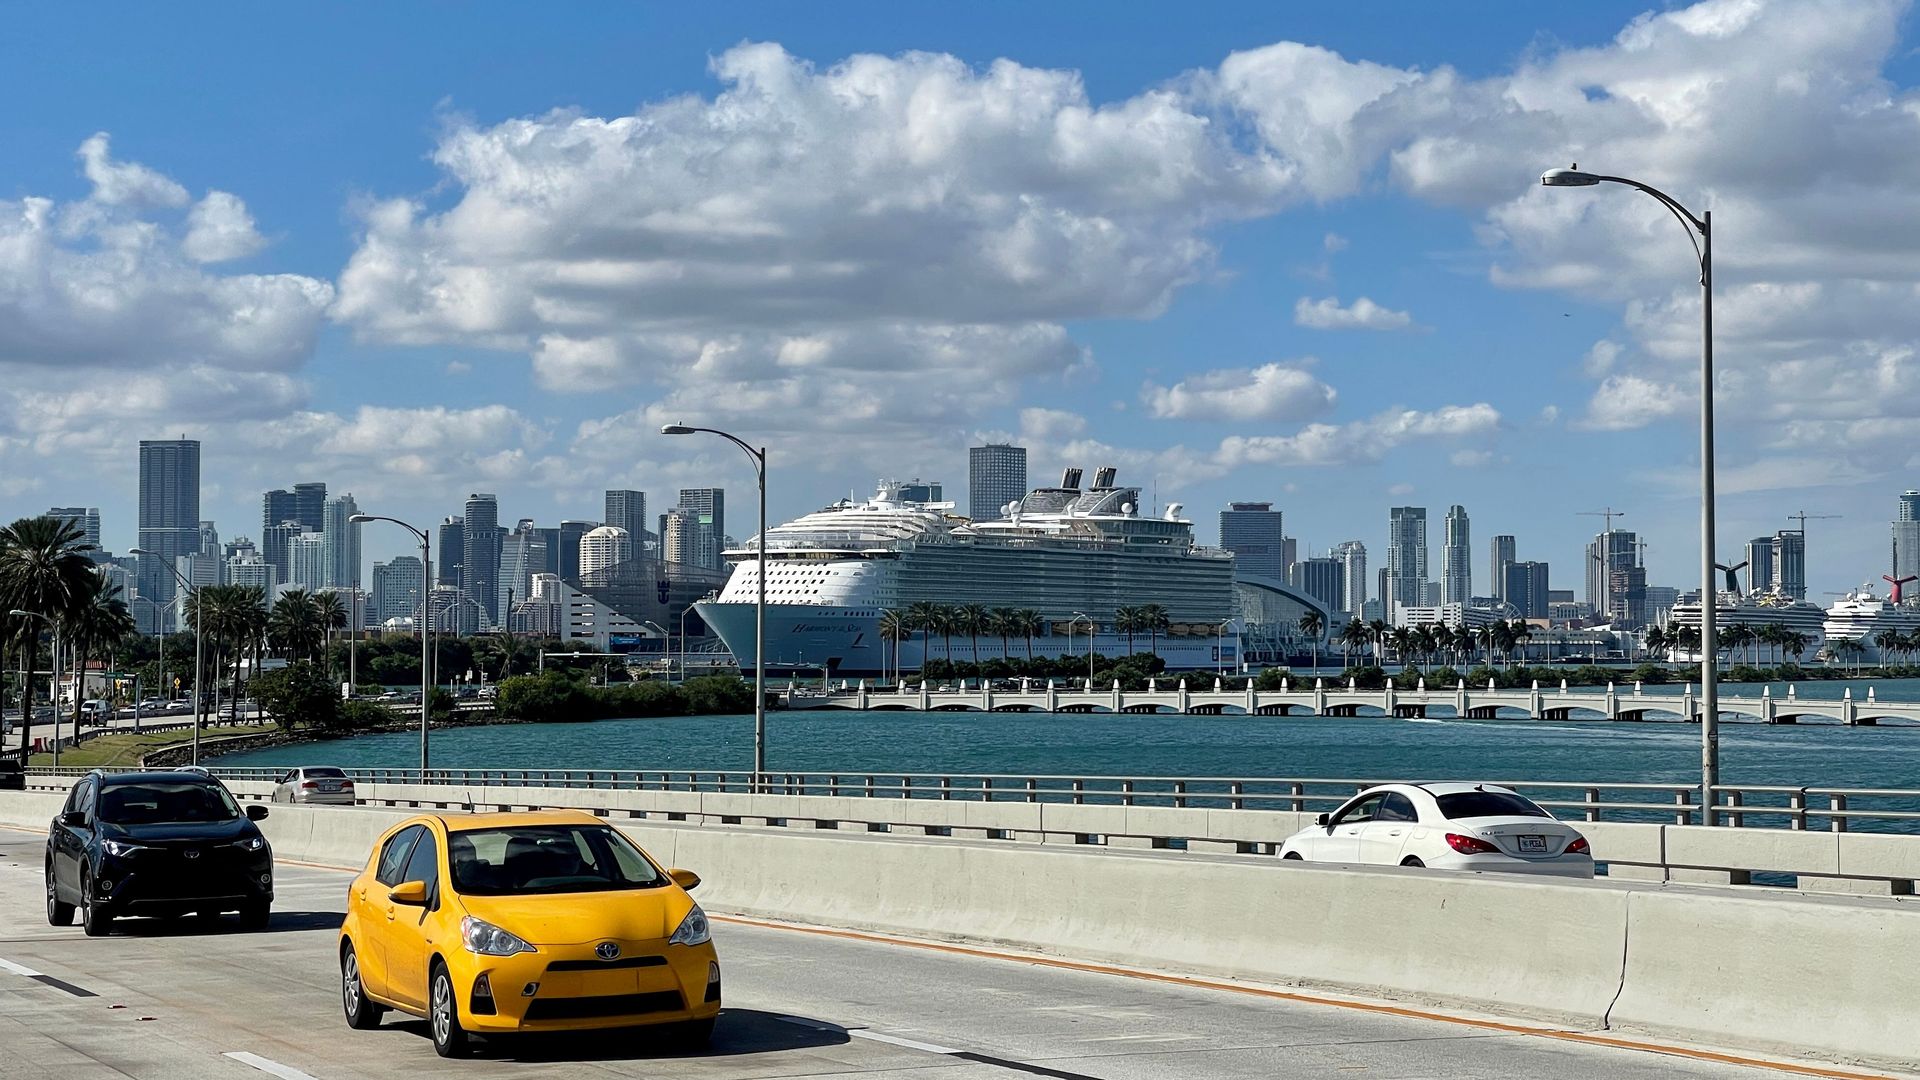  Royal Caribbean International's "The Harmony of the Seas" moored in a port in Miami, Florida, in December 2020.